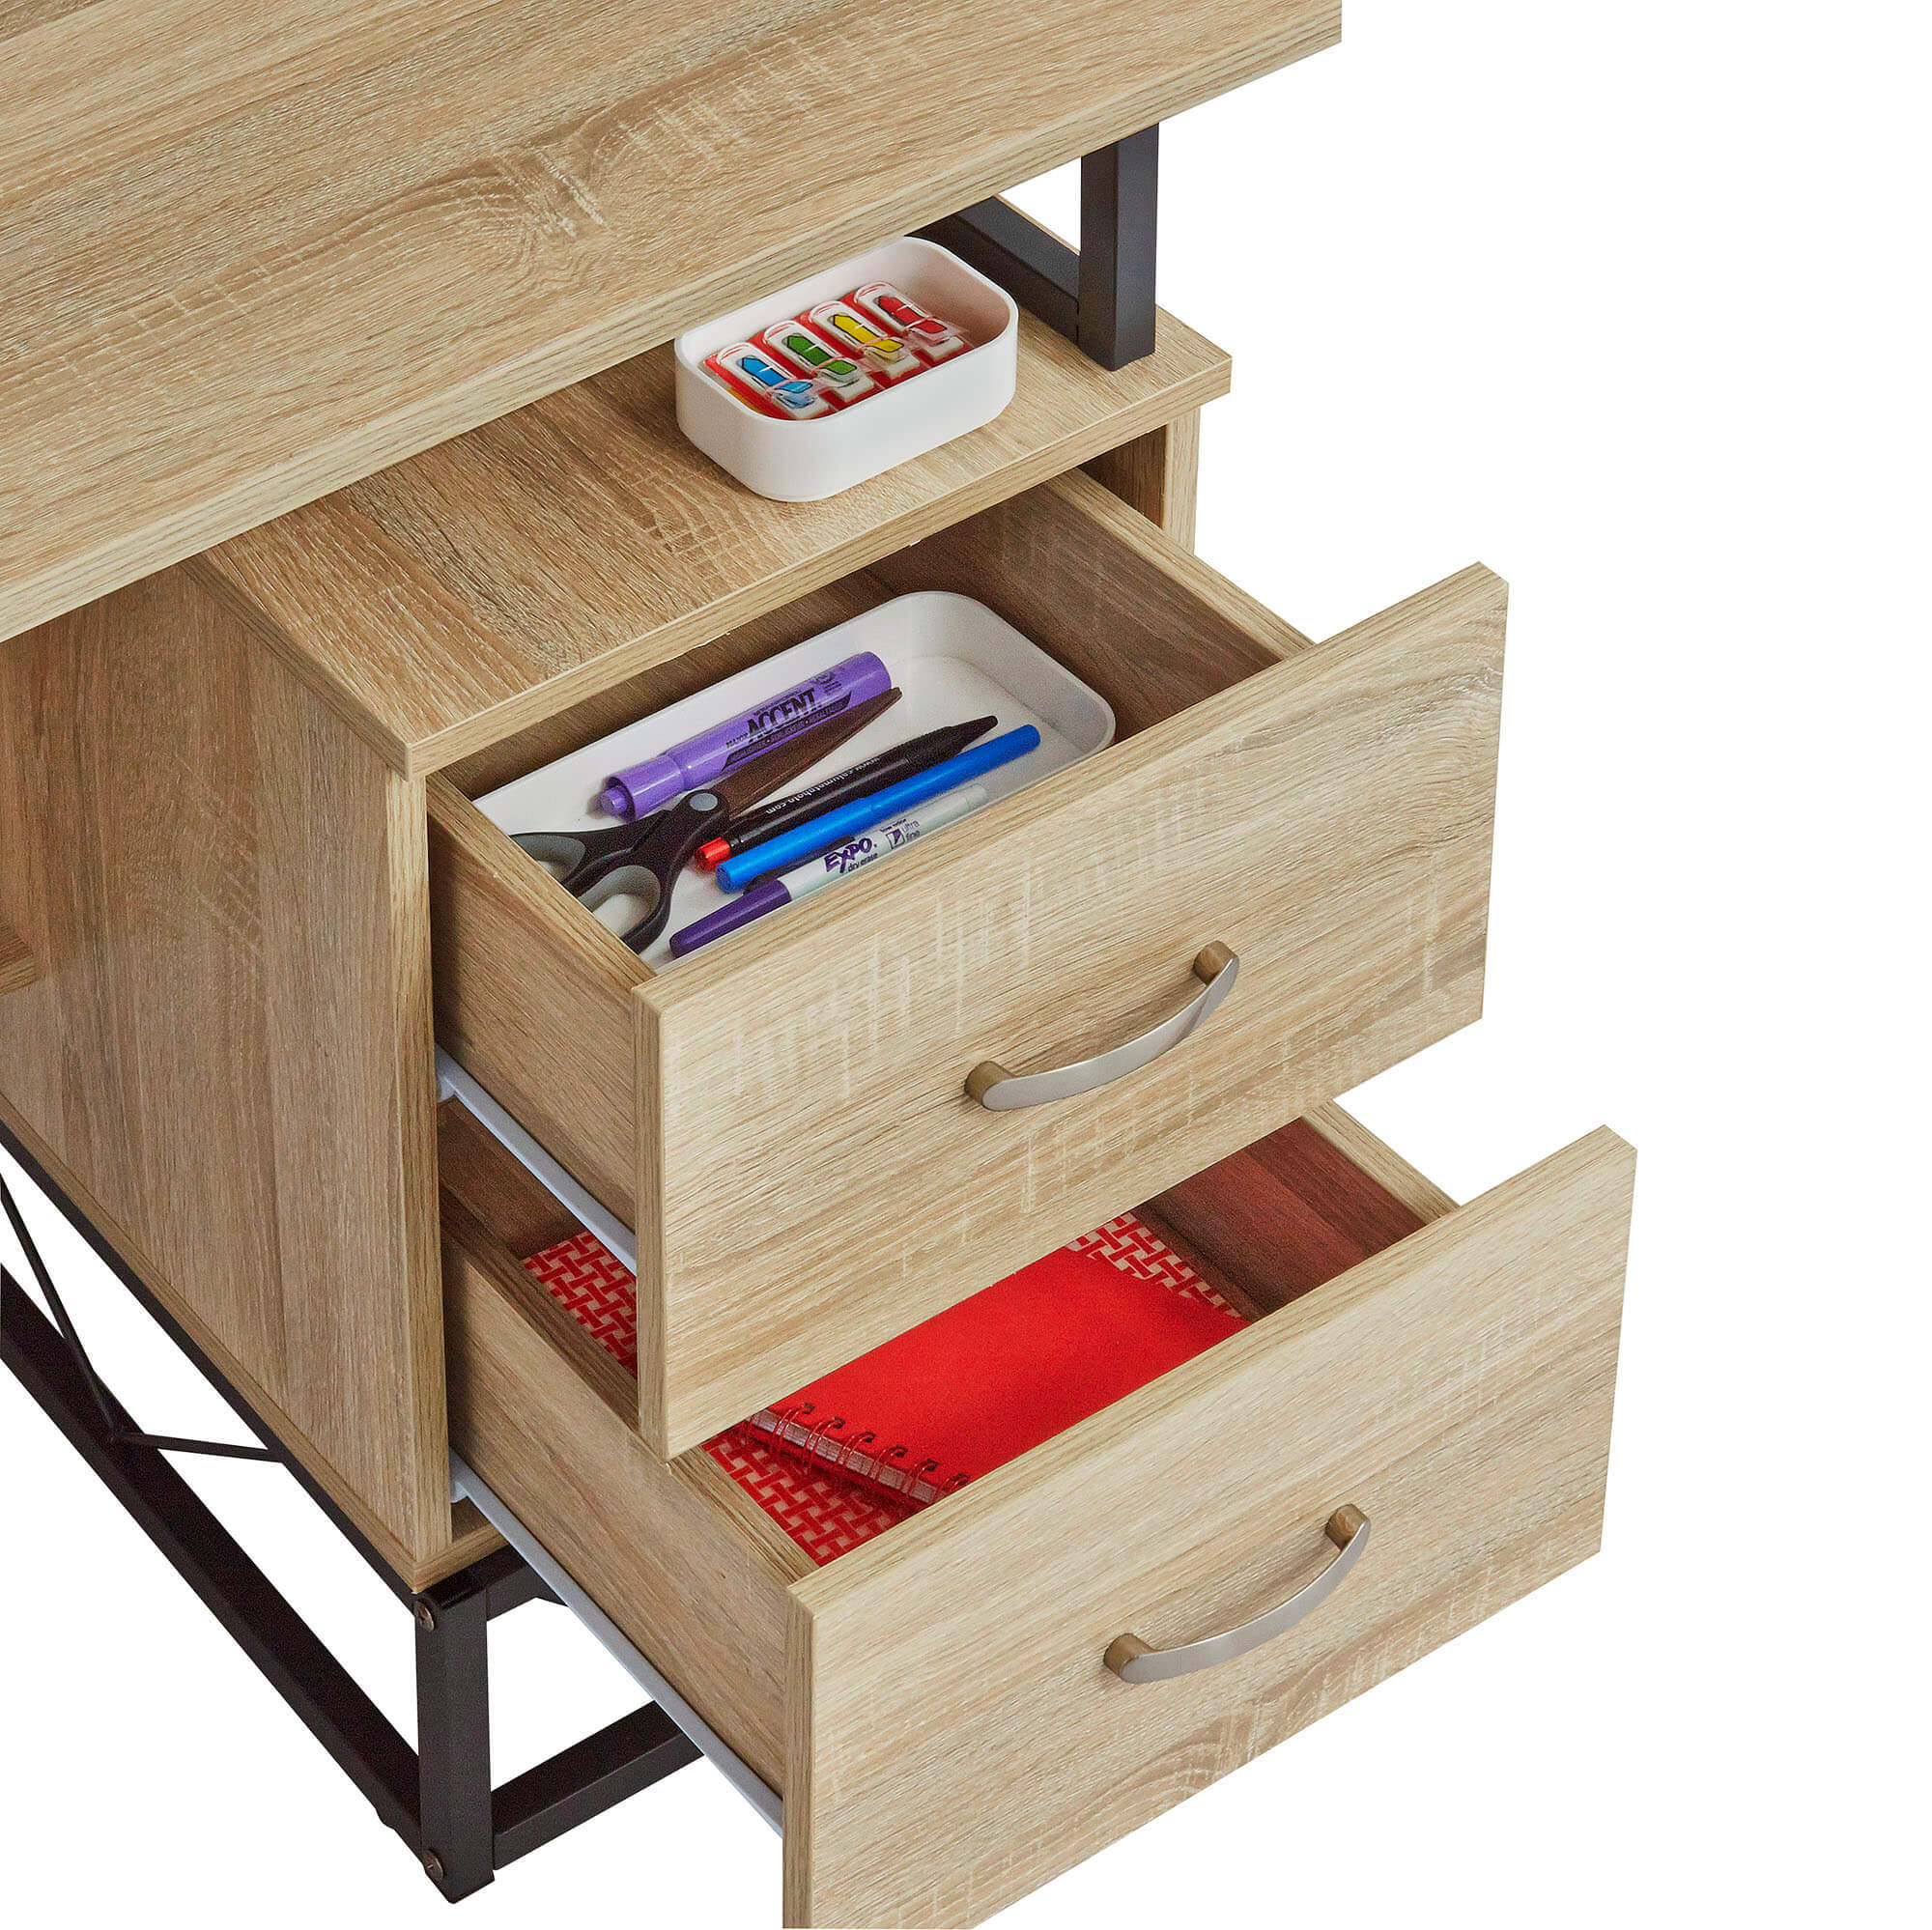 Small home office deks with drawers front angle drawer 1 2 3 4 5 6